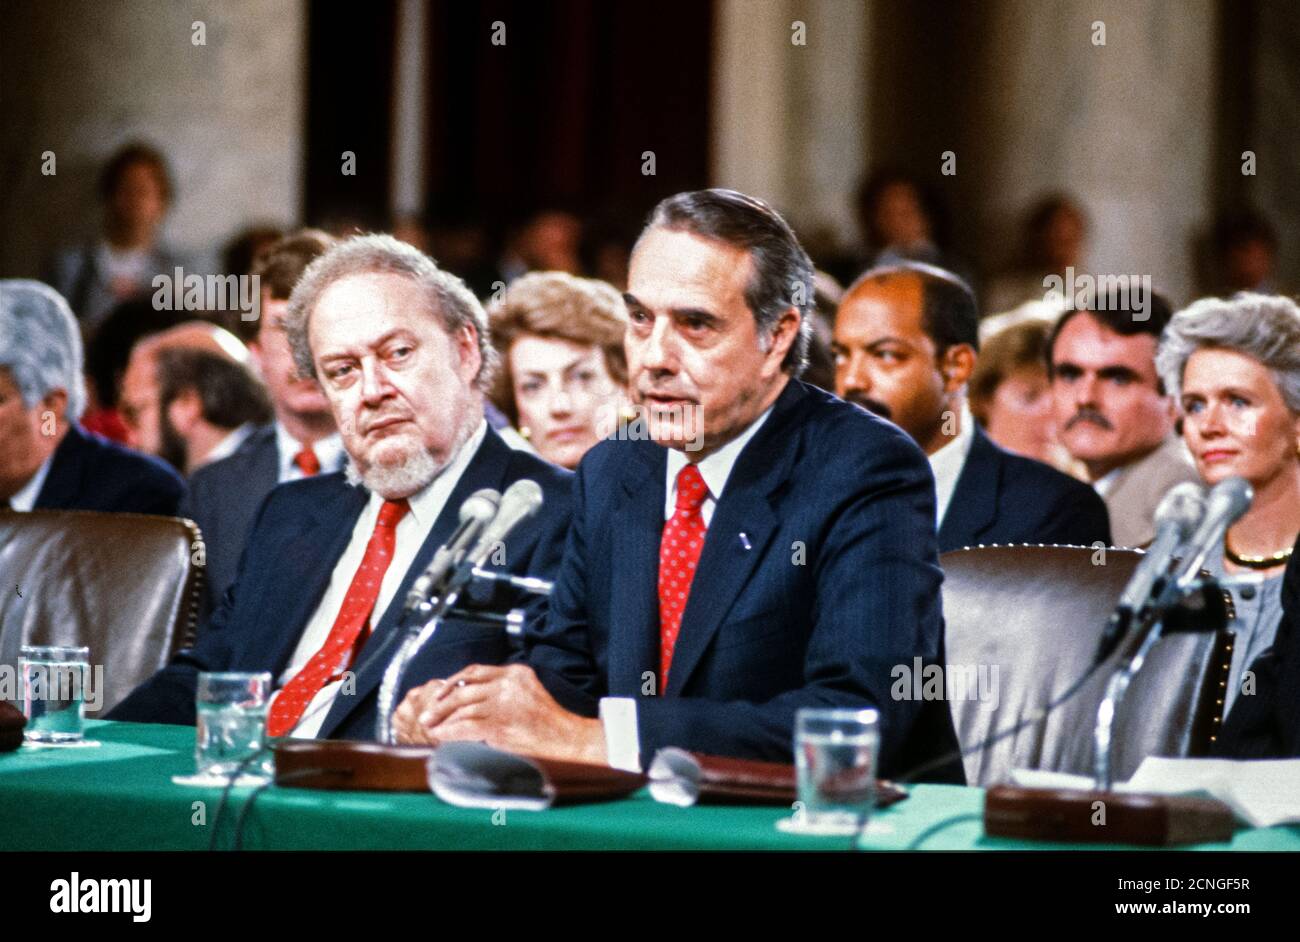 United States Senate Minority Leader Bob Dole (Republican of Kansas), right, introduces Judge Robert Bork, left, during the US Senate Committee on the Judiciary confirmation hearing on Bork's nomination by US President Ronald Reagan, as Associate Justice of the Supreme Court to succeed Justice Lewis Powell, who is retiring, in Washington, DC on September 15, 1987.Credit: Arnie Sachs/CNP | usage worldwide Stock Photo